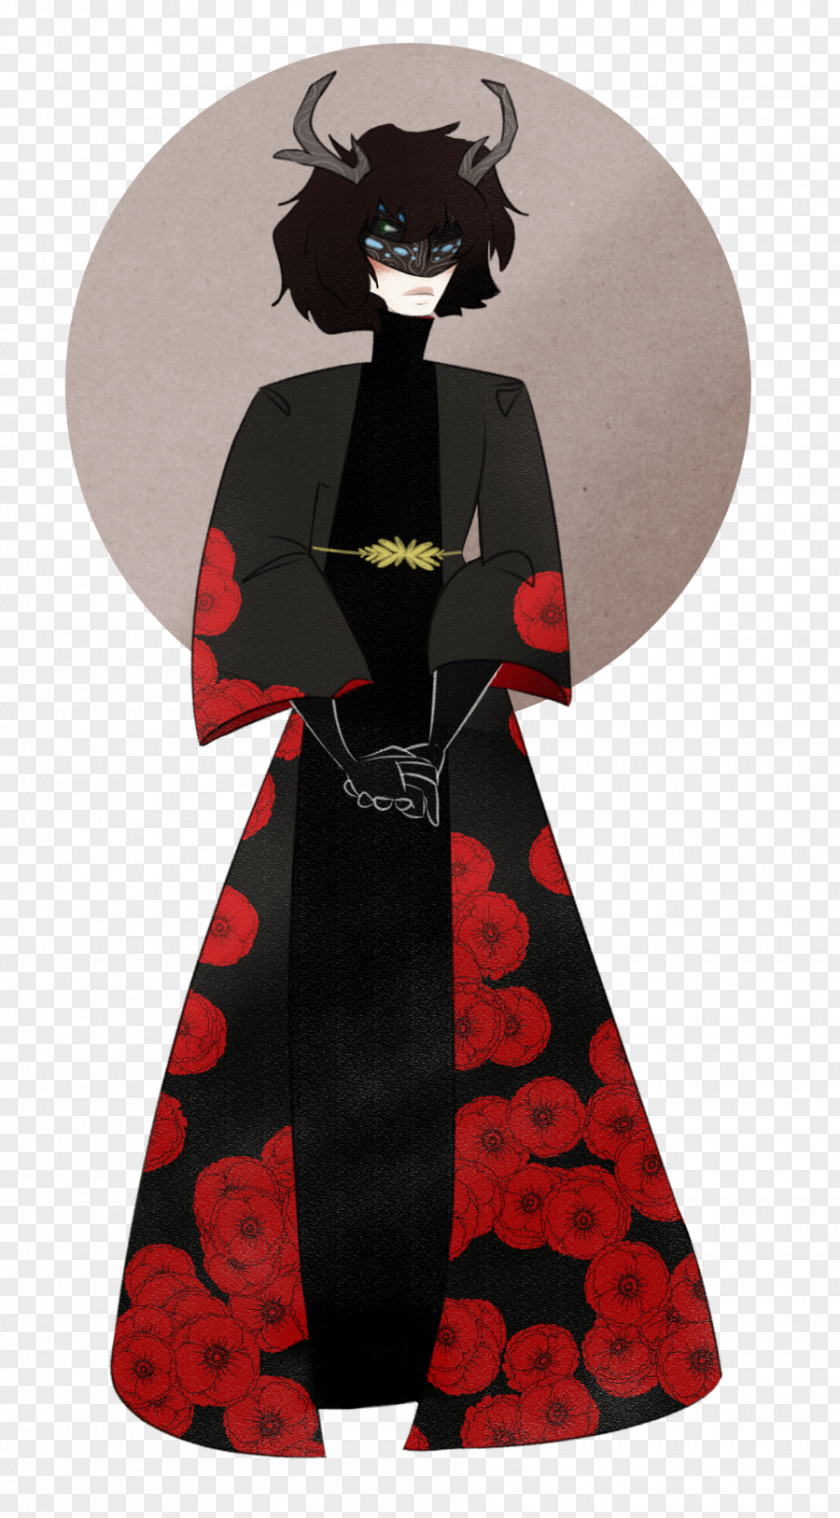 She Mask Costume Design Outerwear Character PNG